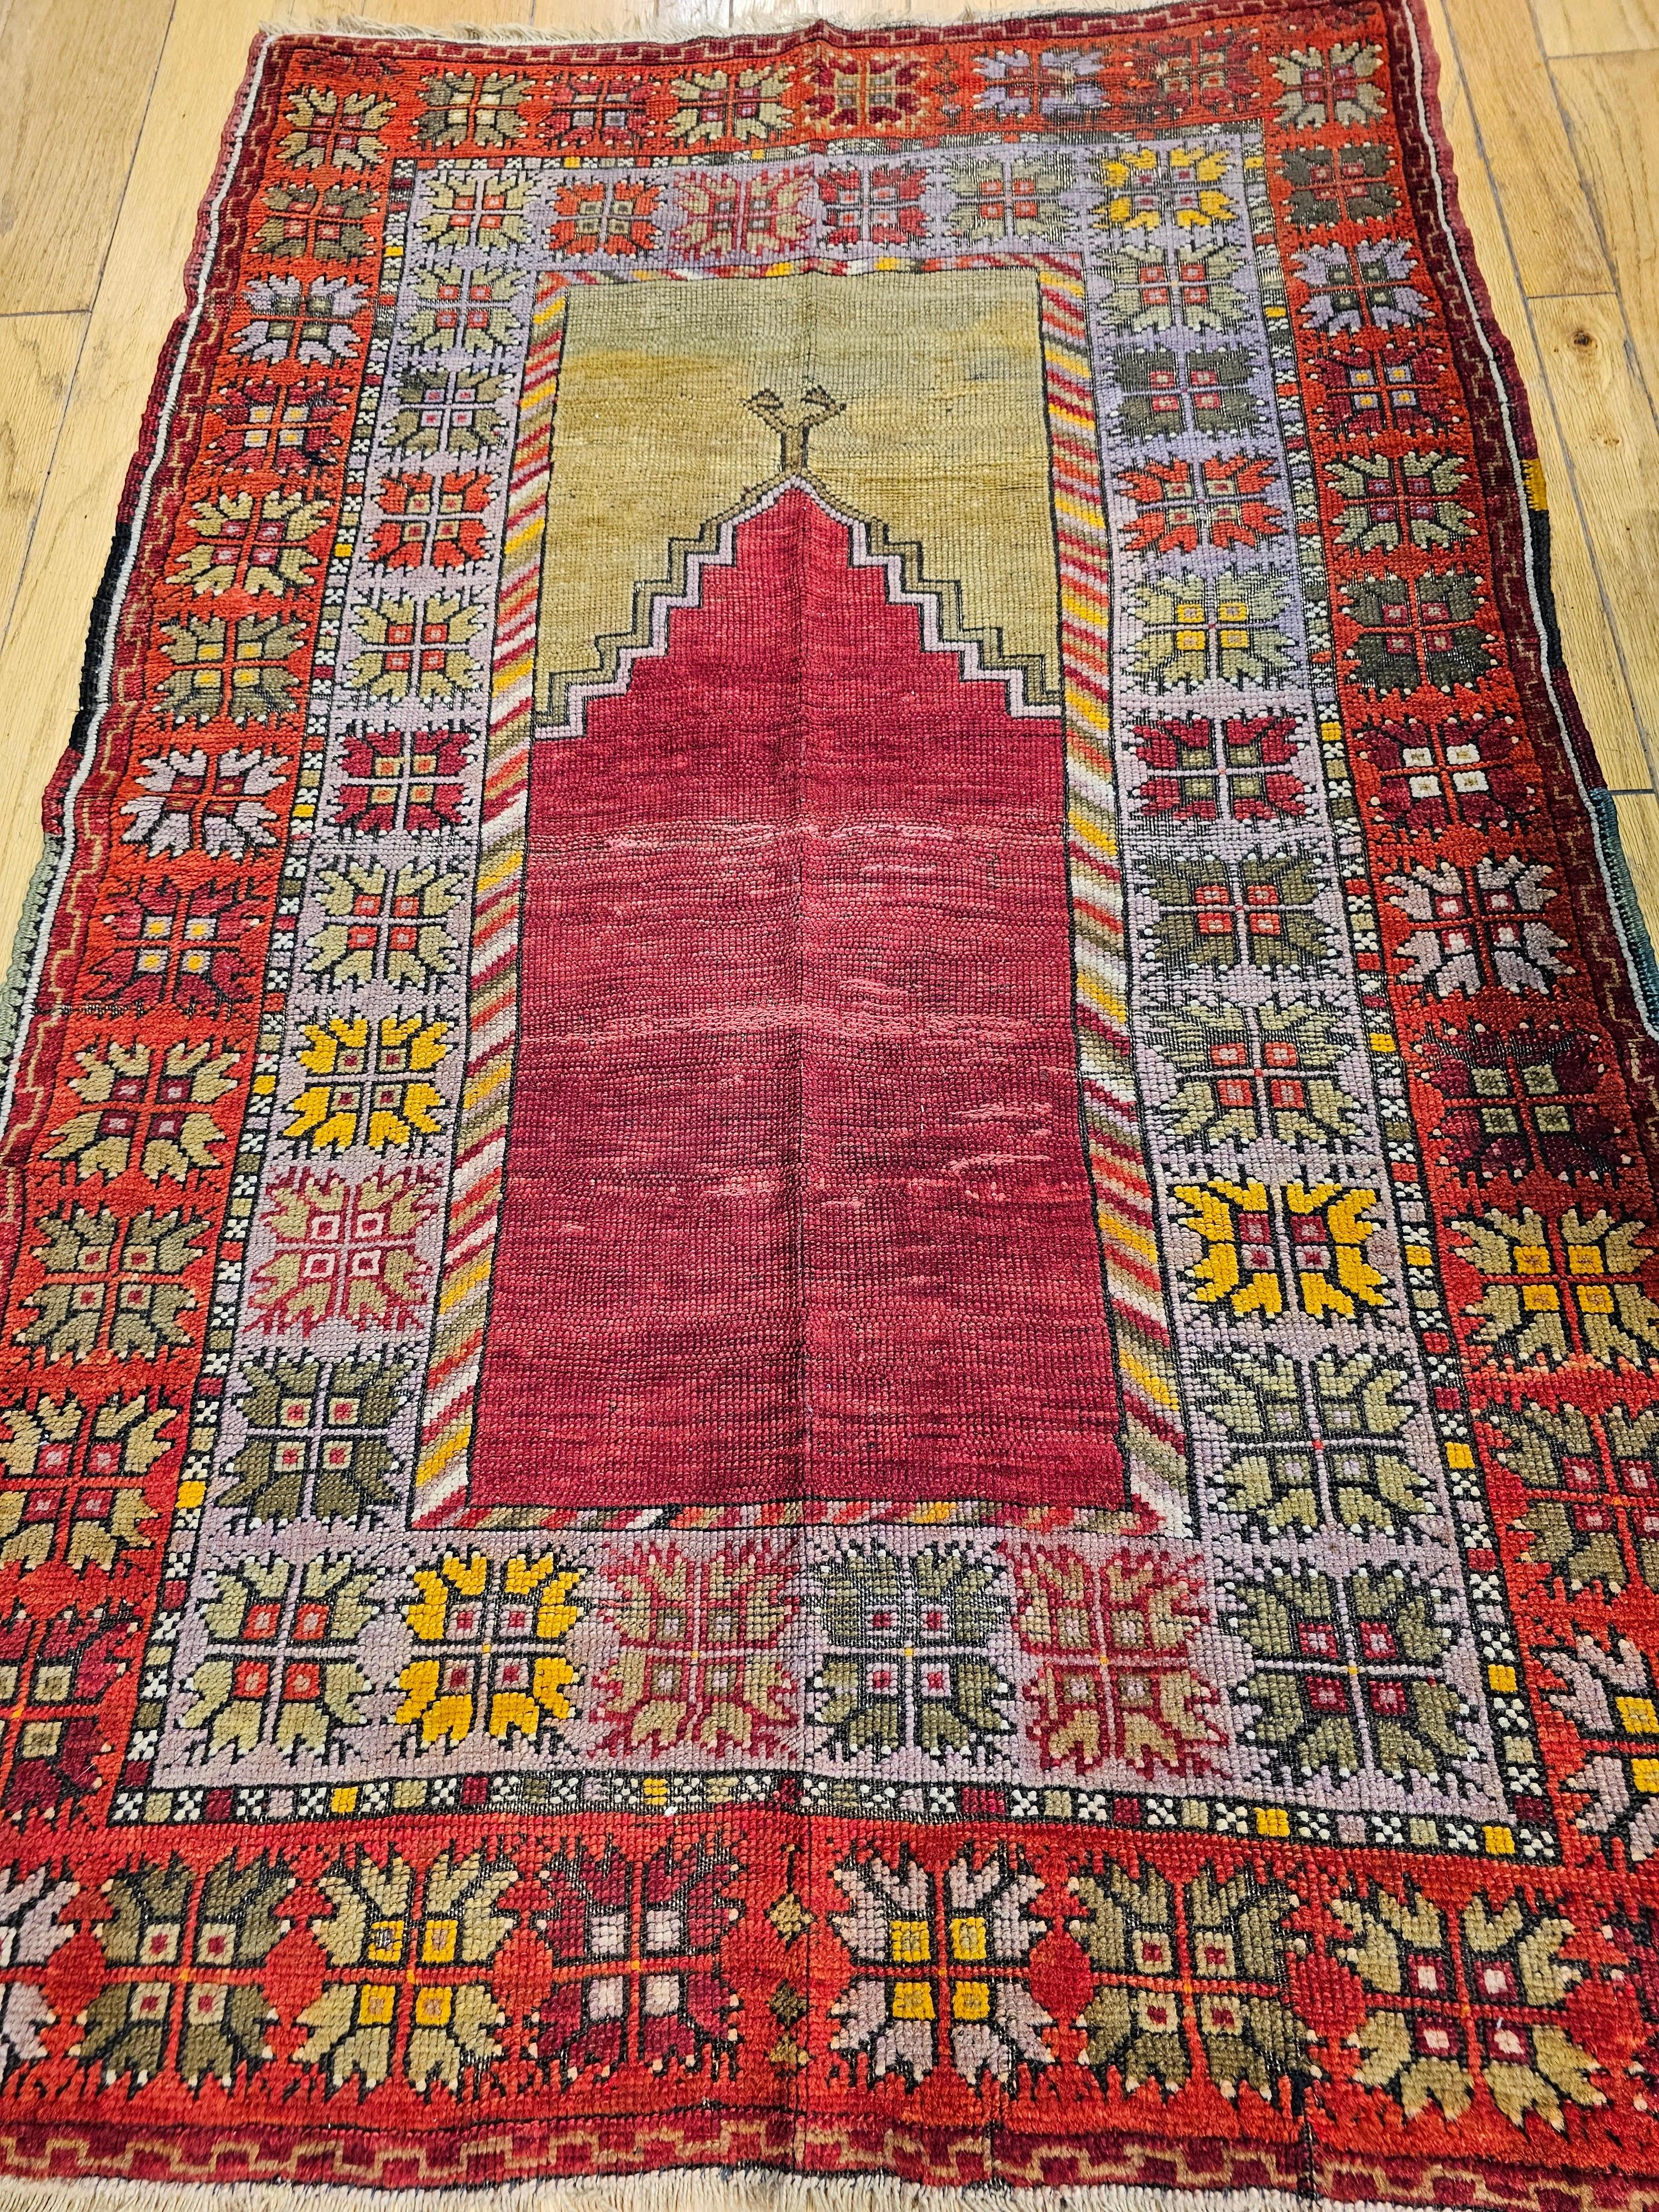 A beautiful Anatolian village rug in a prayer rug (Mihrab) design.  The rug was artistically woven in the early 1900s.  The use of natural organic vegetable dyes that mellow over time clearly shows the superiority of these rugs.  The rug has a pale